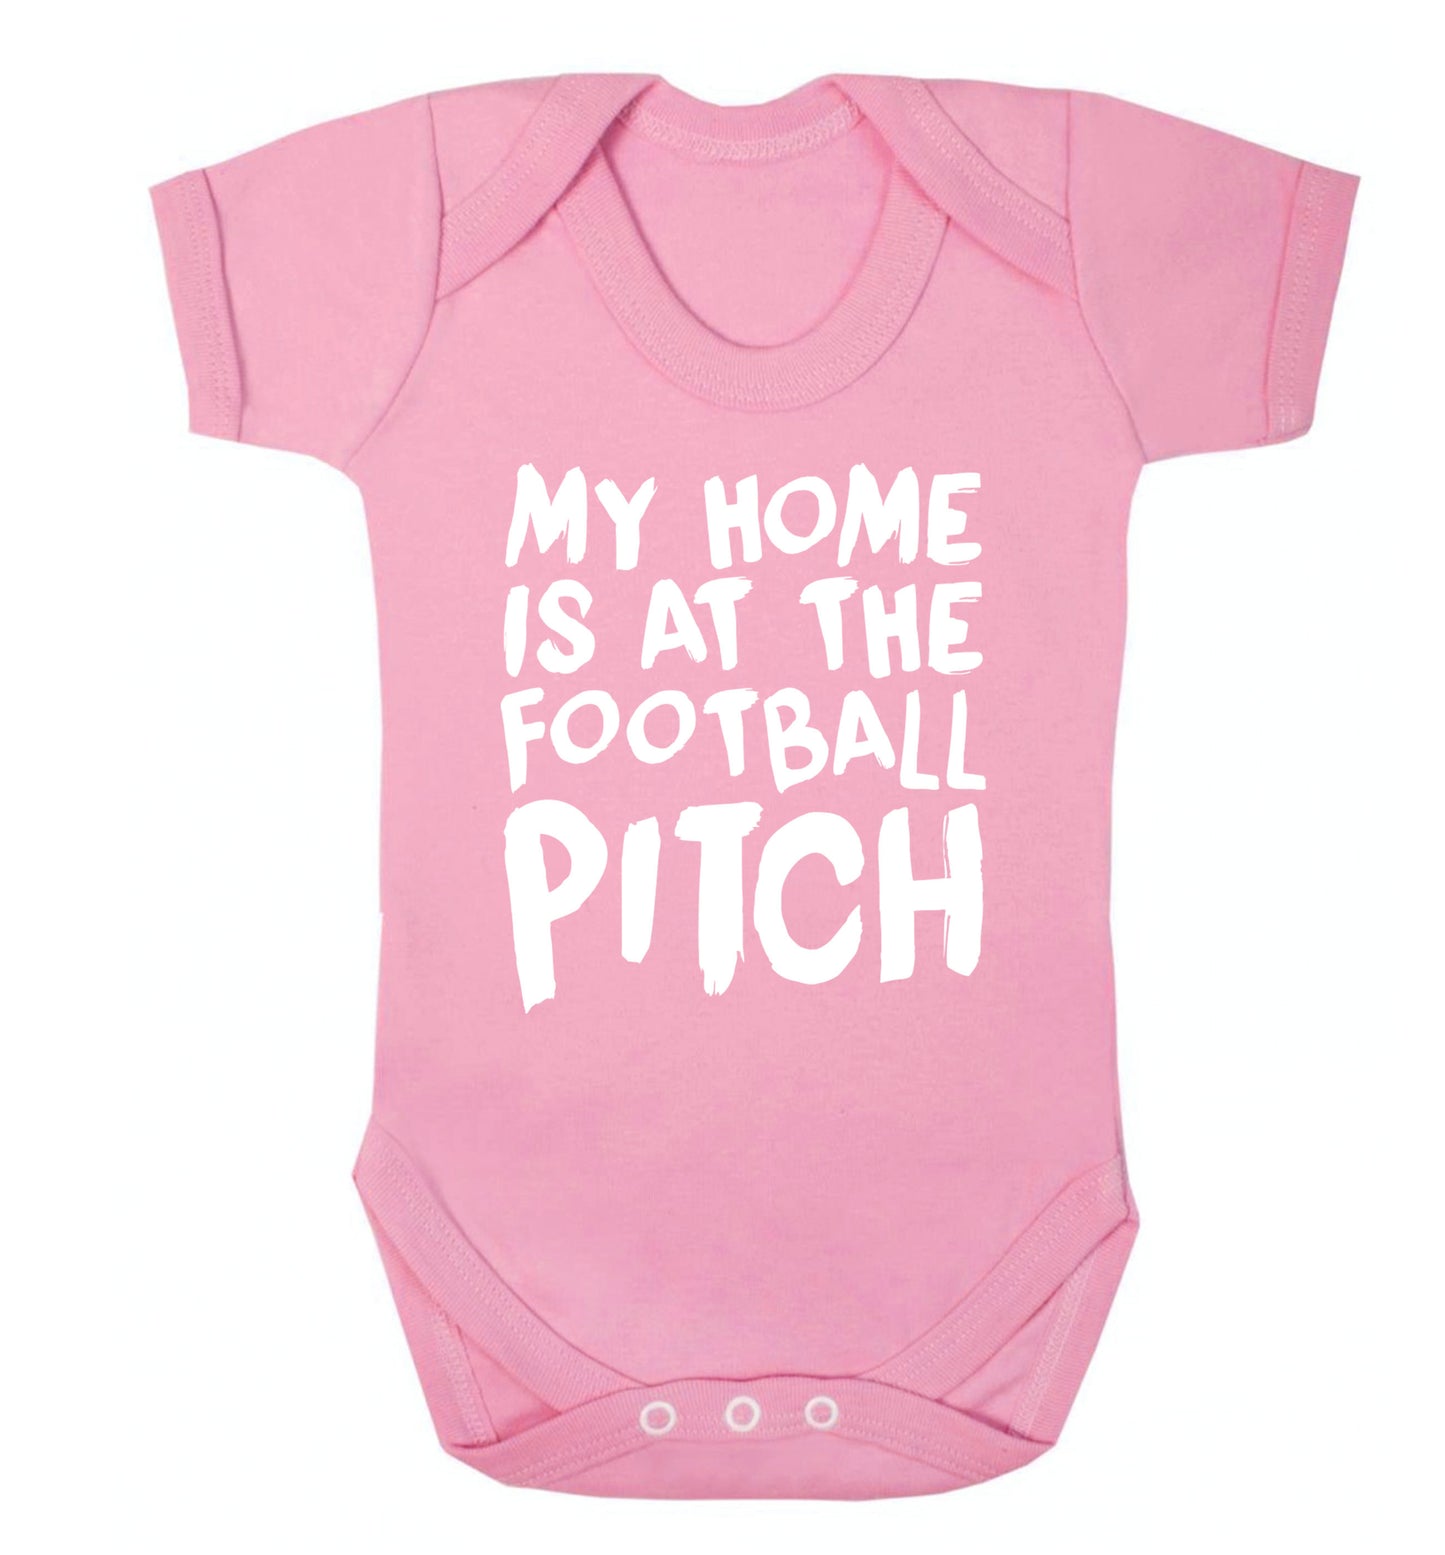 My home is at the football pitch Baby Vest pale pink 18-24 months